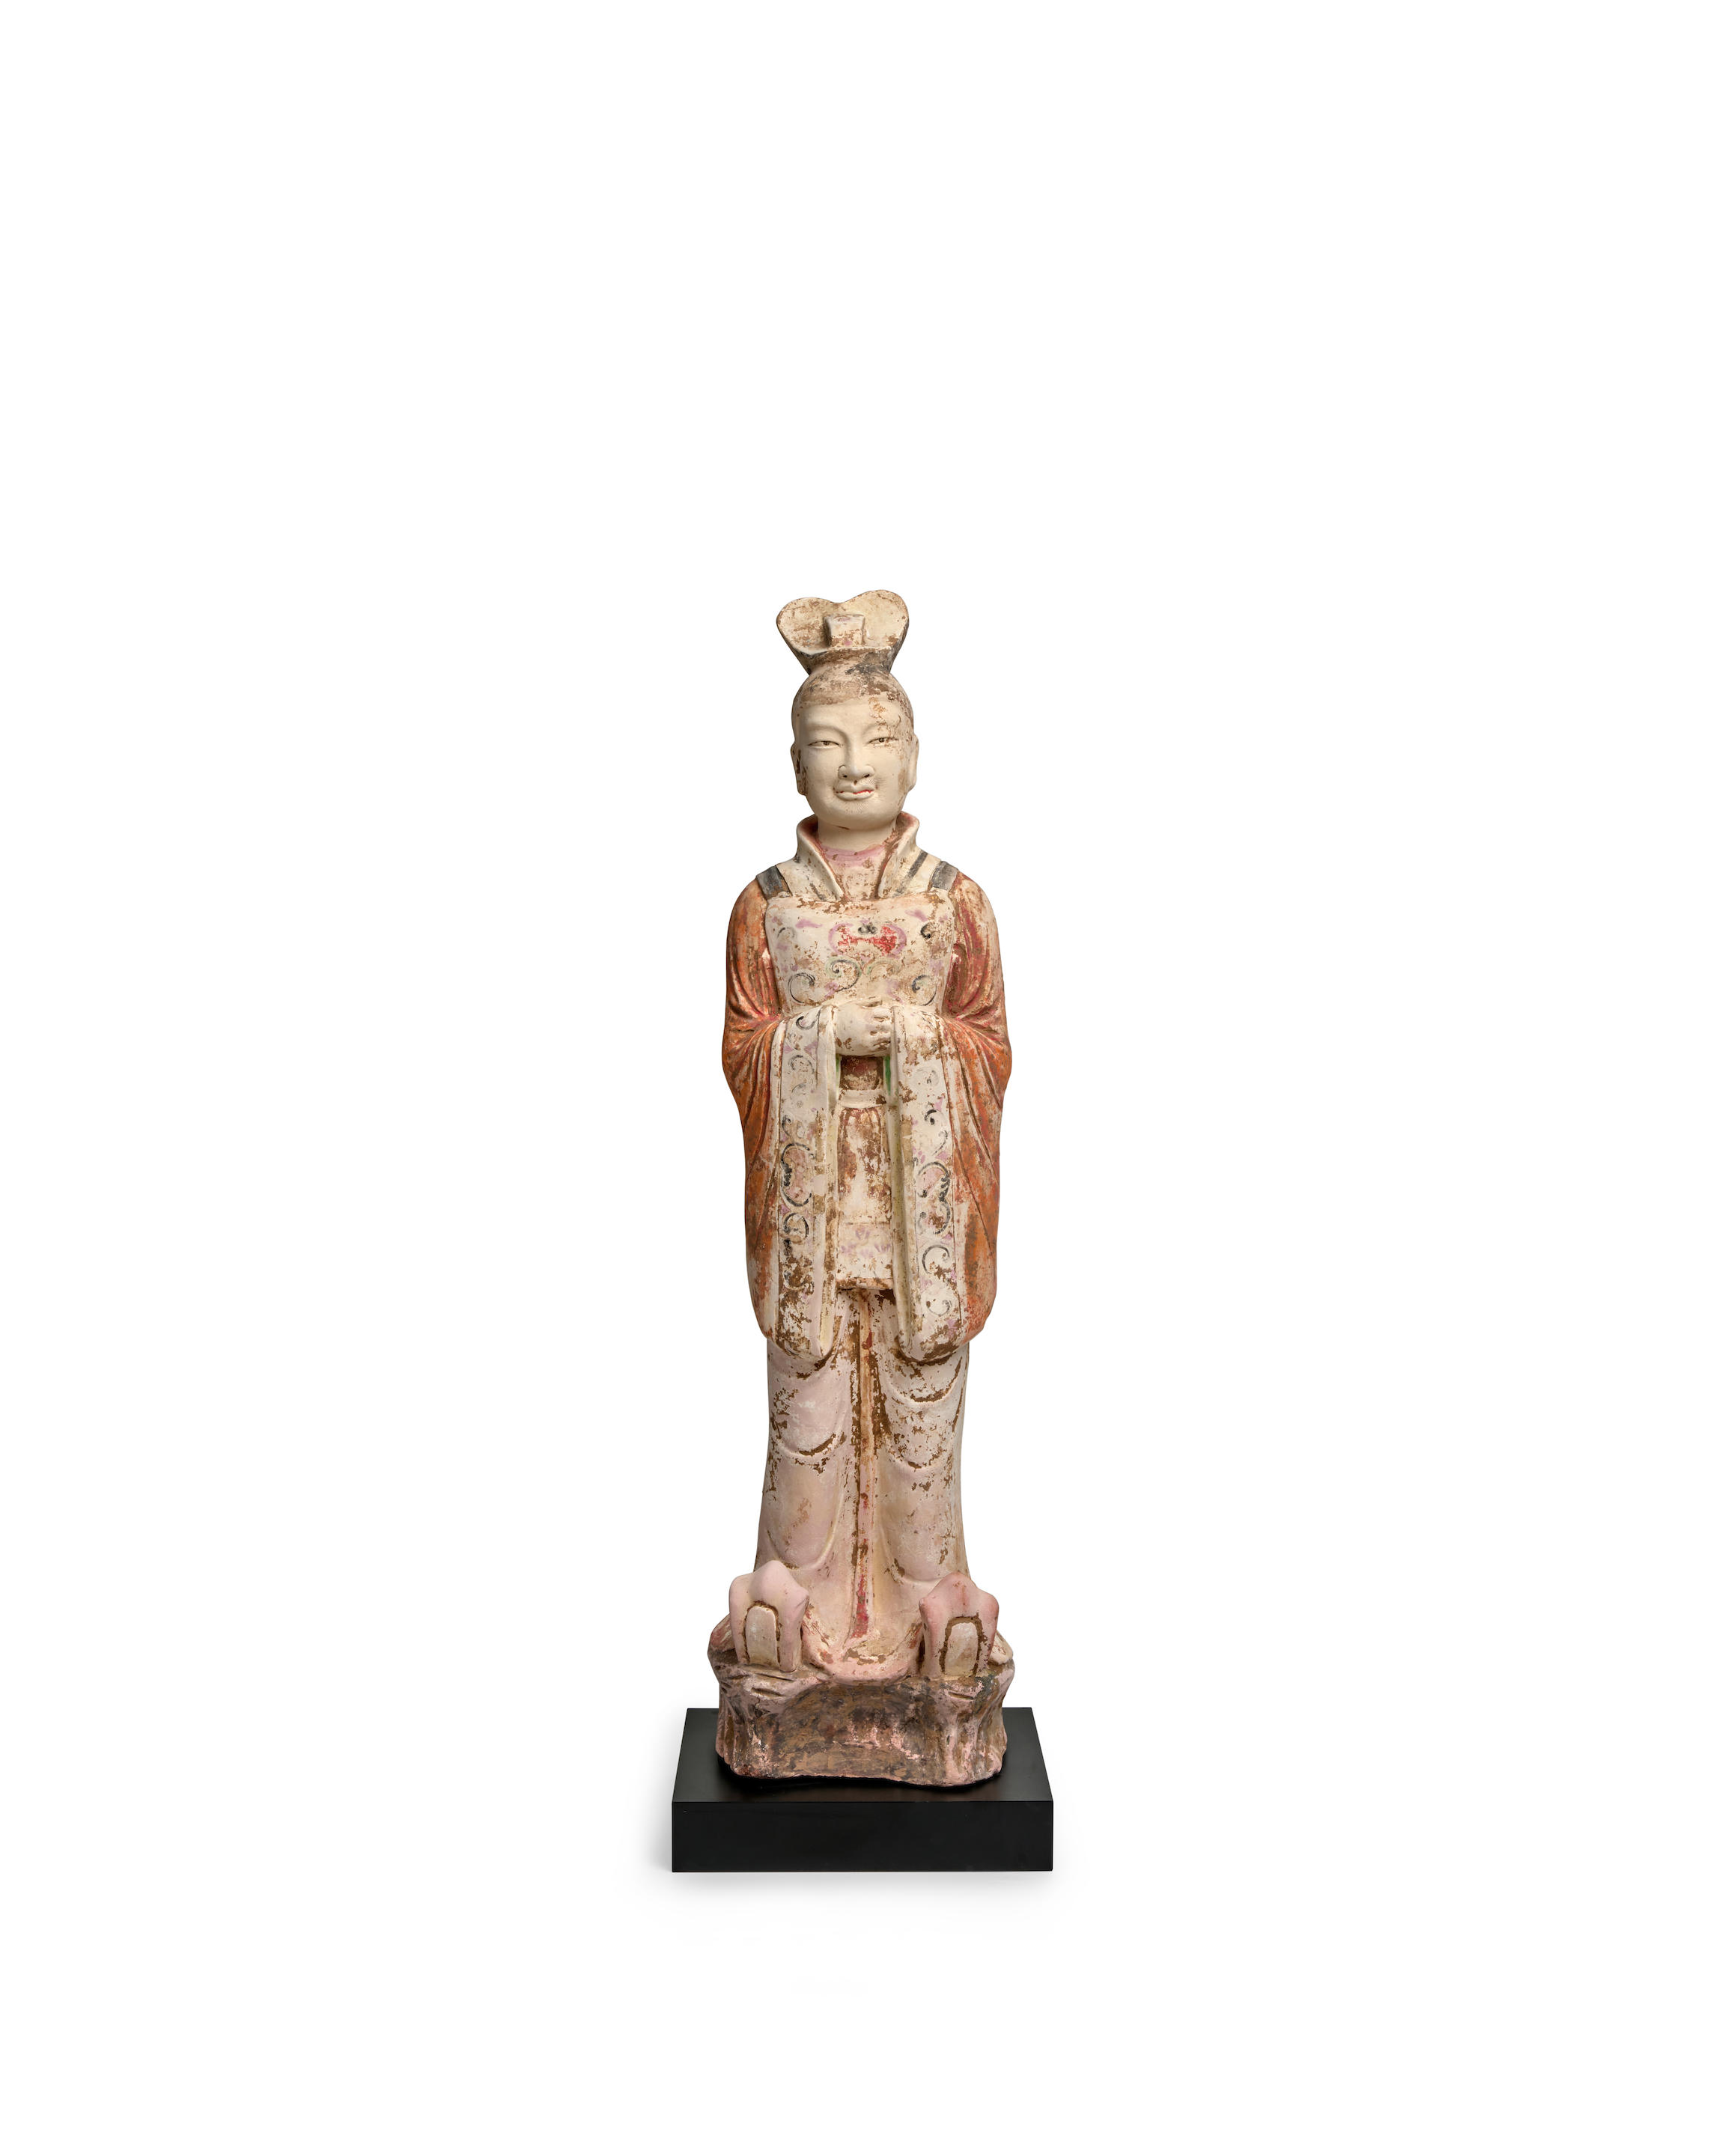 A MASSIVE PAINTED POTTERY FIGURE OF A COURT DIGNITARY